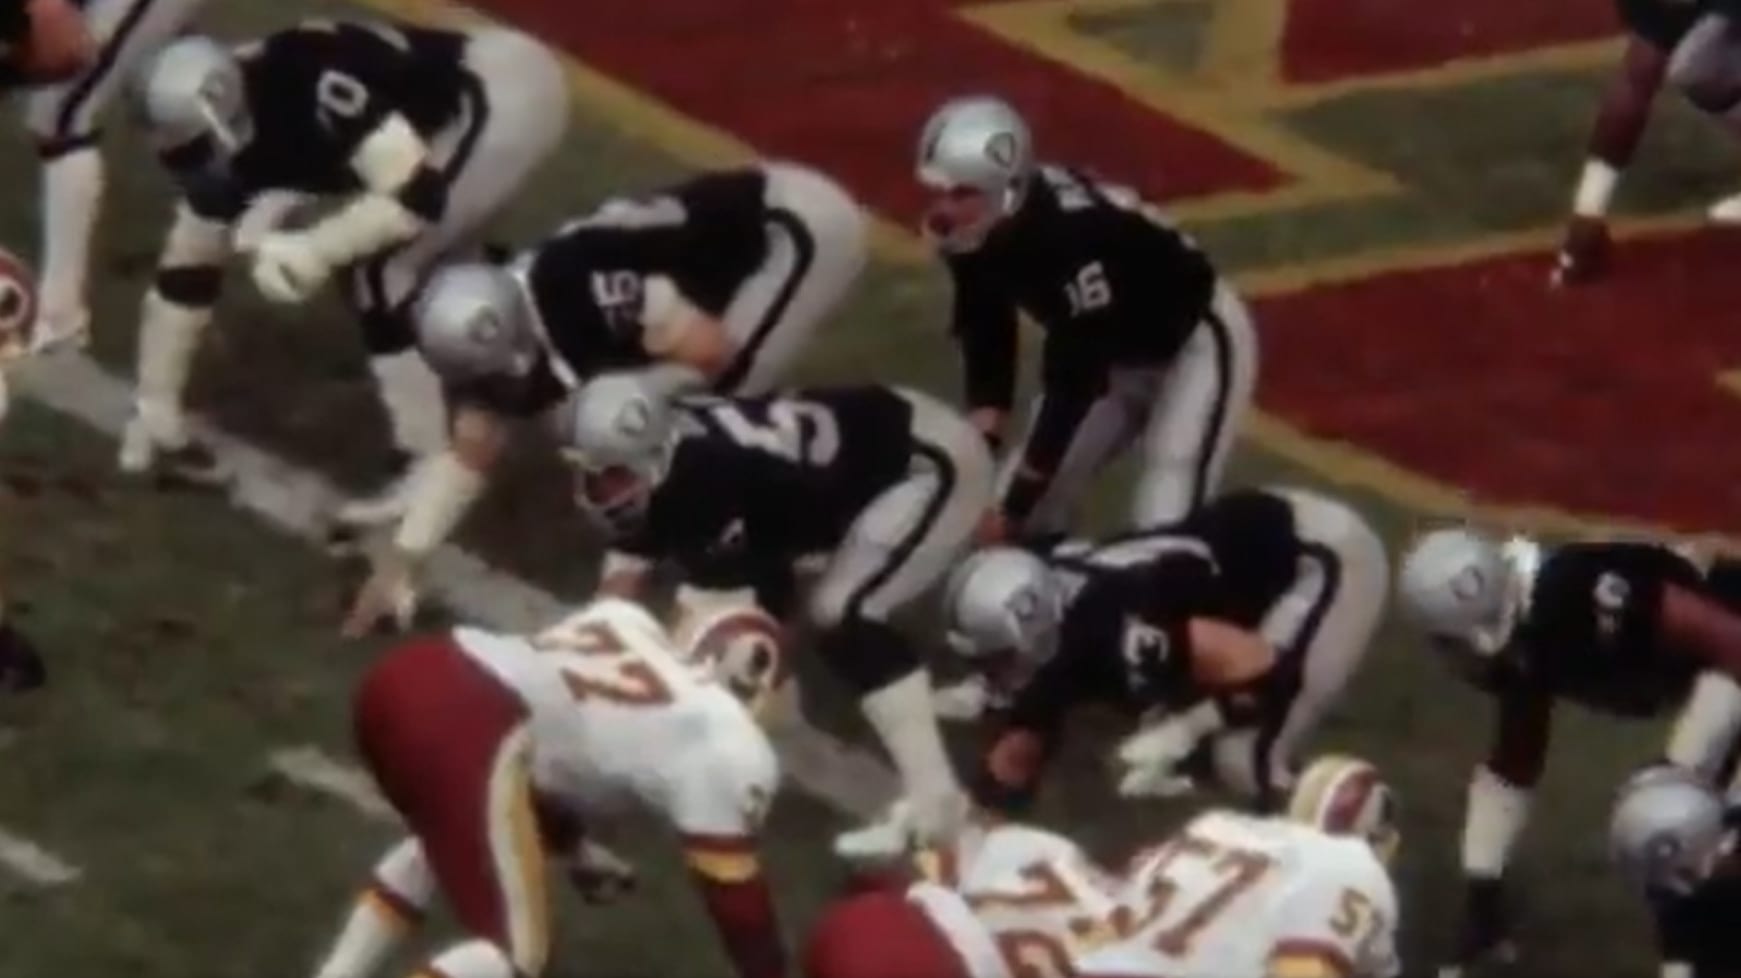 VIDEO: Remembering When the Raiders' Jim Plunkett Threw the First 99-Yard Touchdown Pass in NFL History